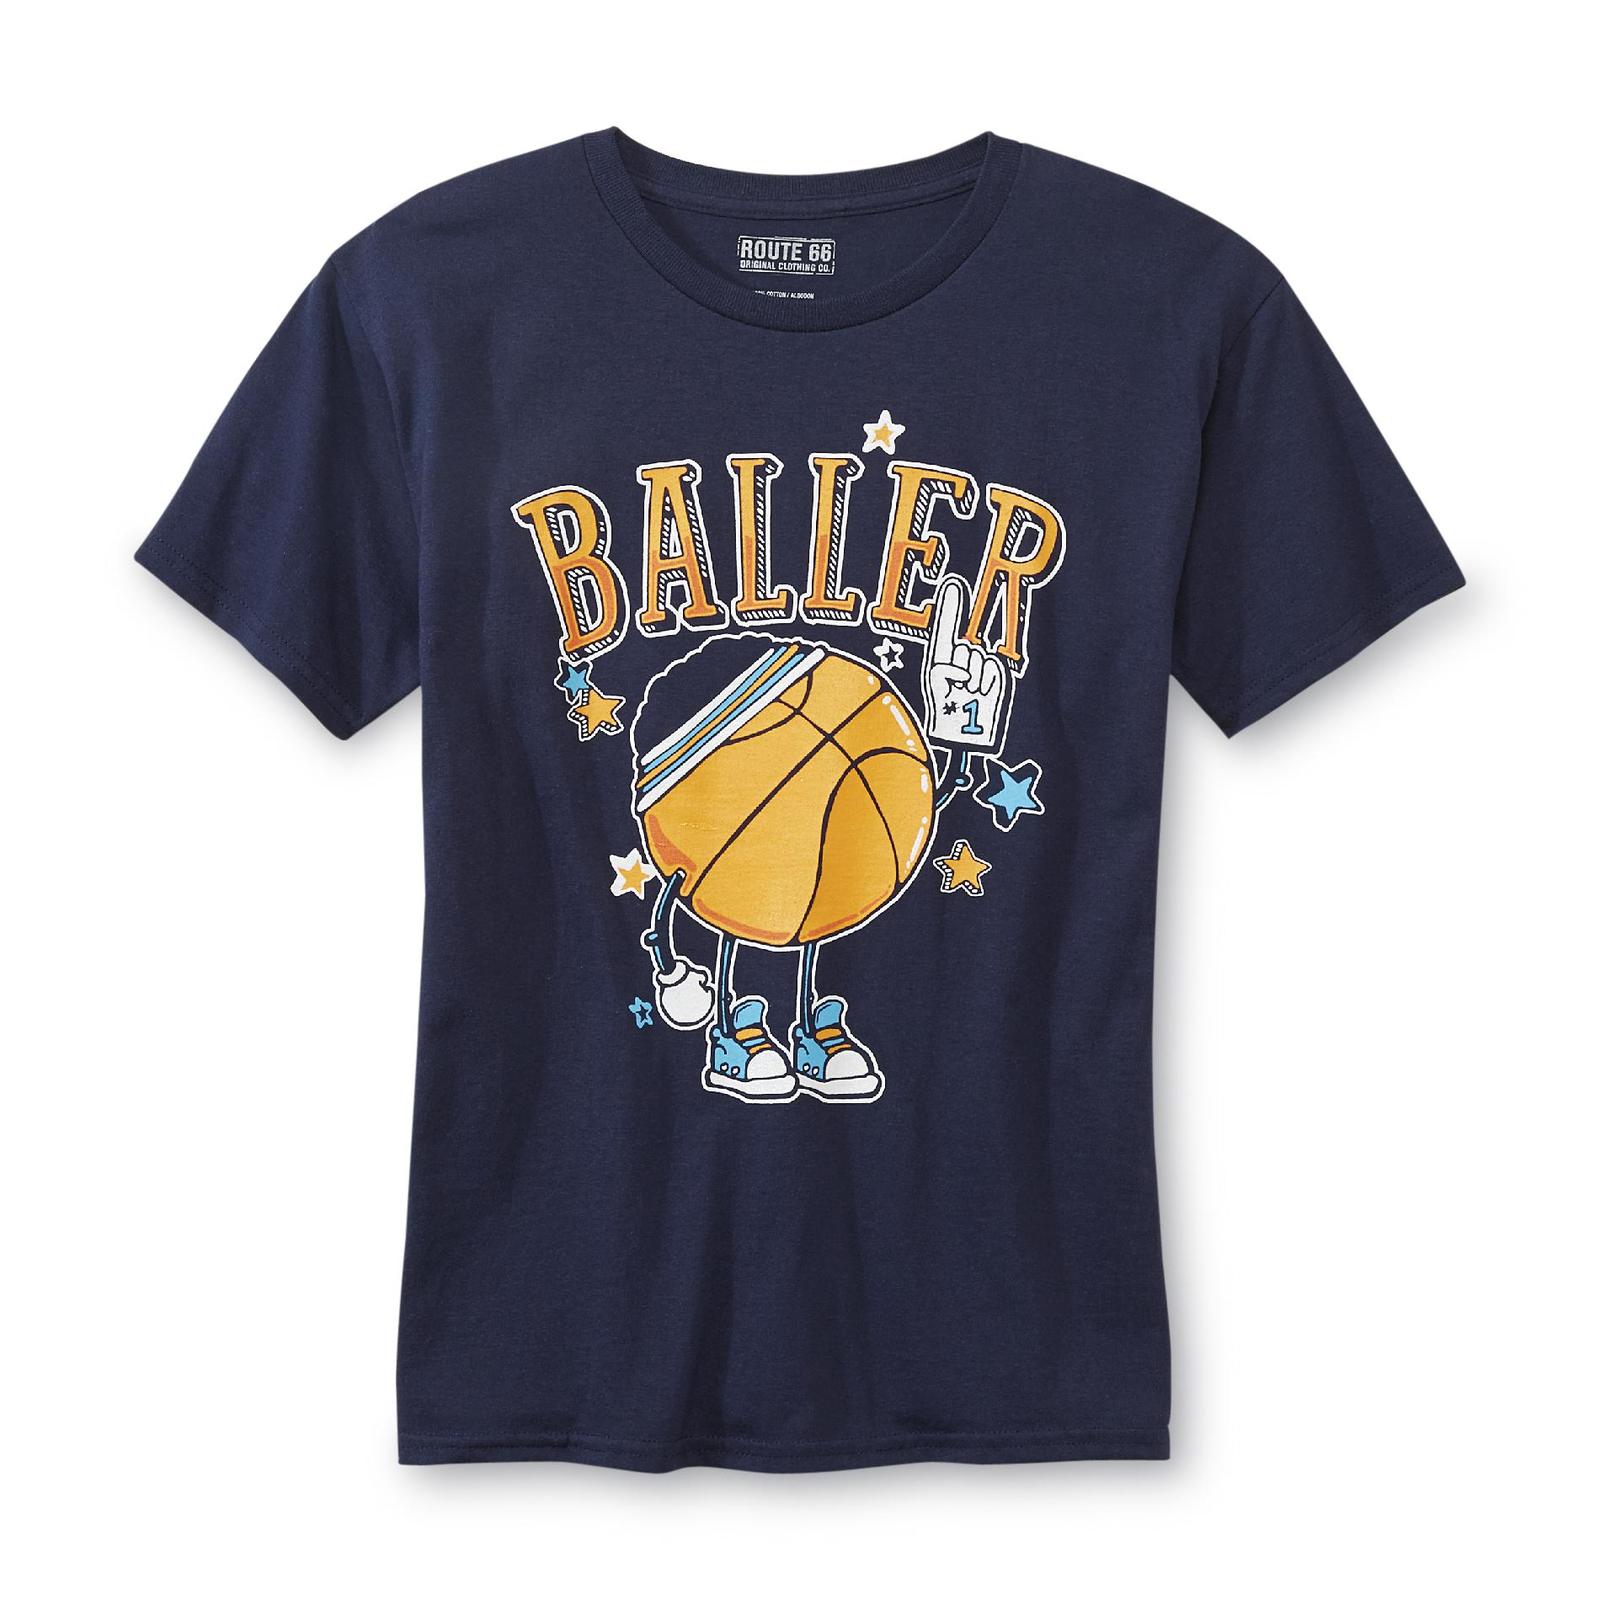 Route 66 Boy's Graphic T-Shirt - Basketball